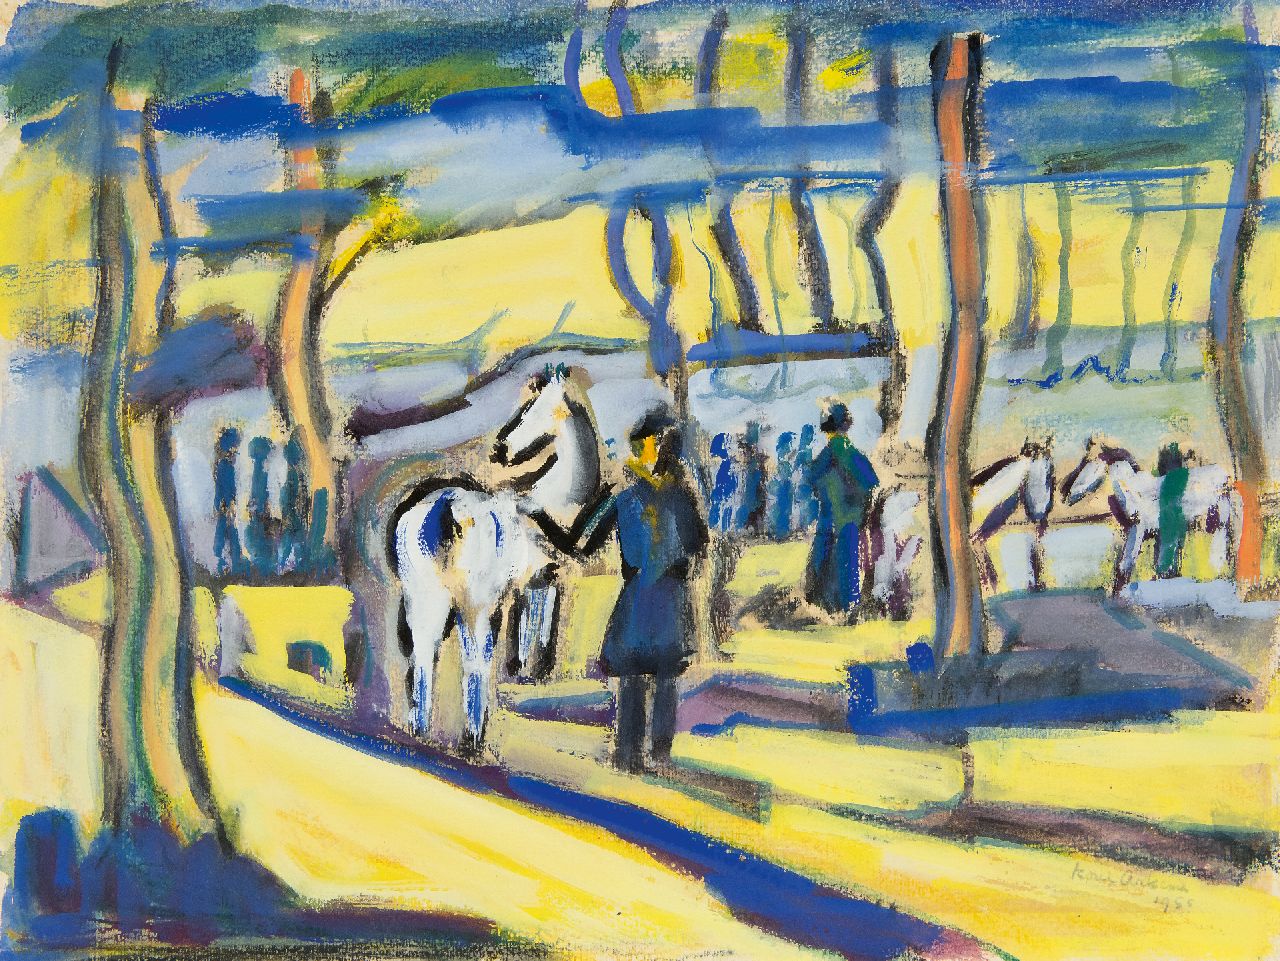 Arkema K.F.  | 'Karel' Frederik Arkema | Watercolours and drawings offered for sale | Figures and horses in a colored landscape, gouache on paper 37.5 x 49.7 cm, signed l.r. and dated 1955